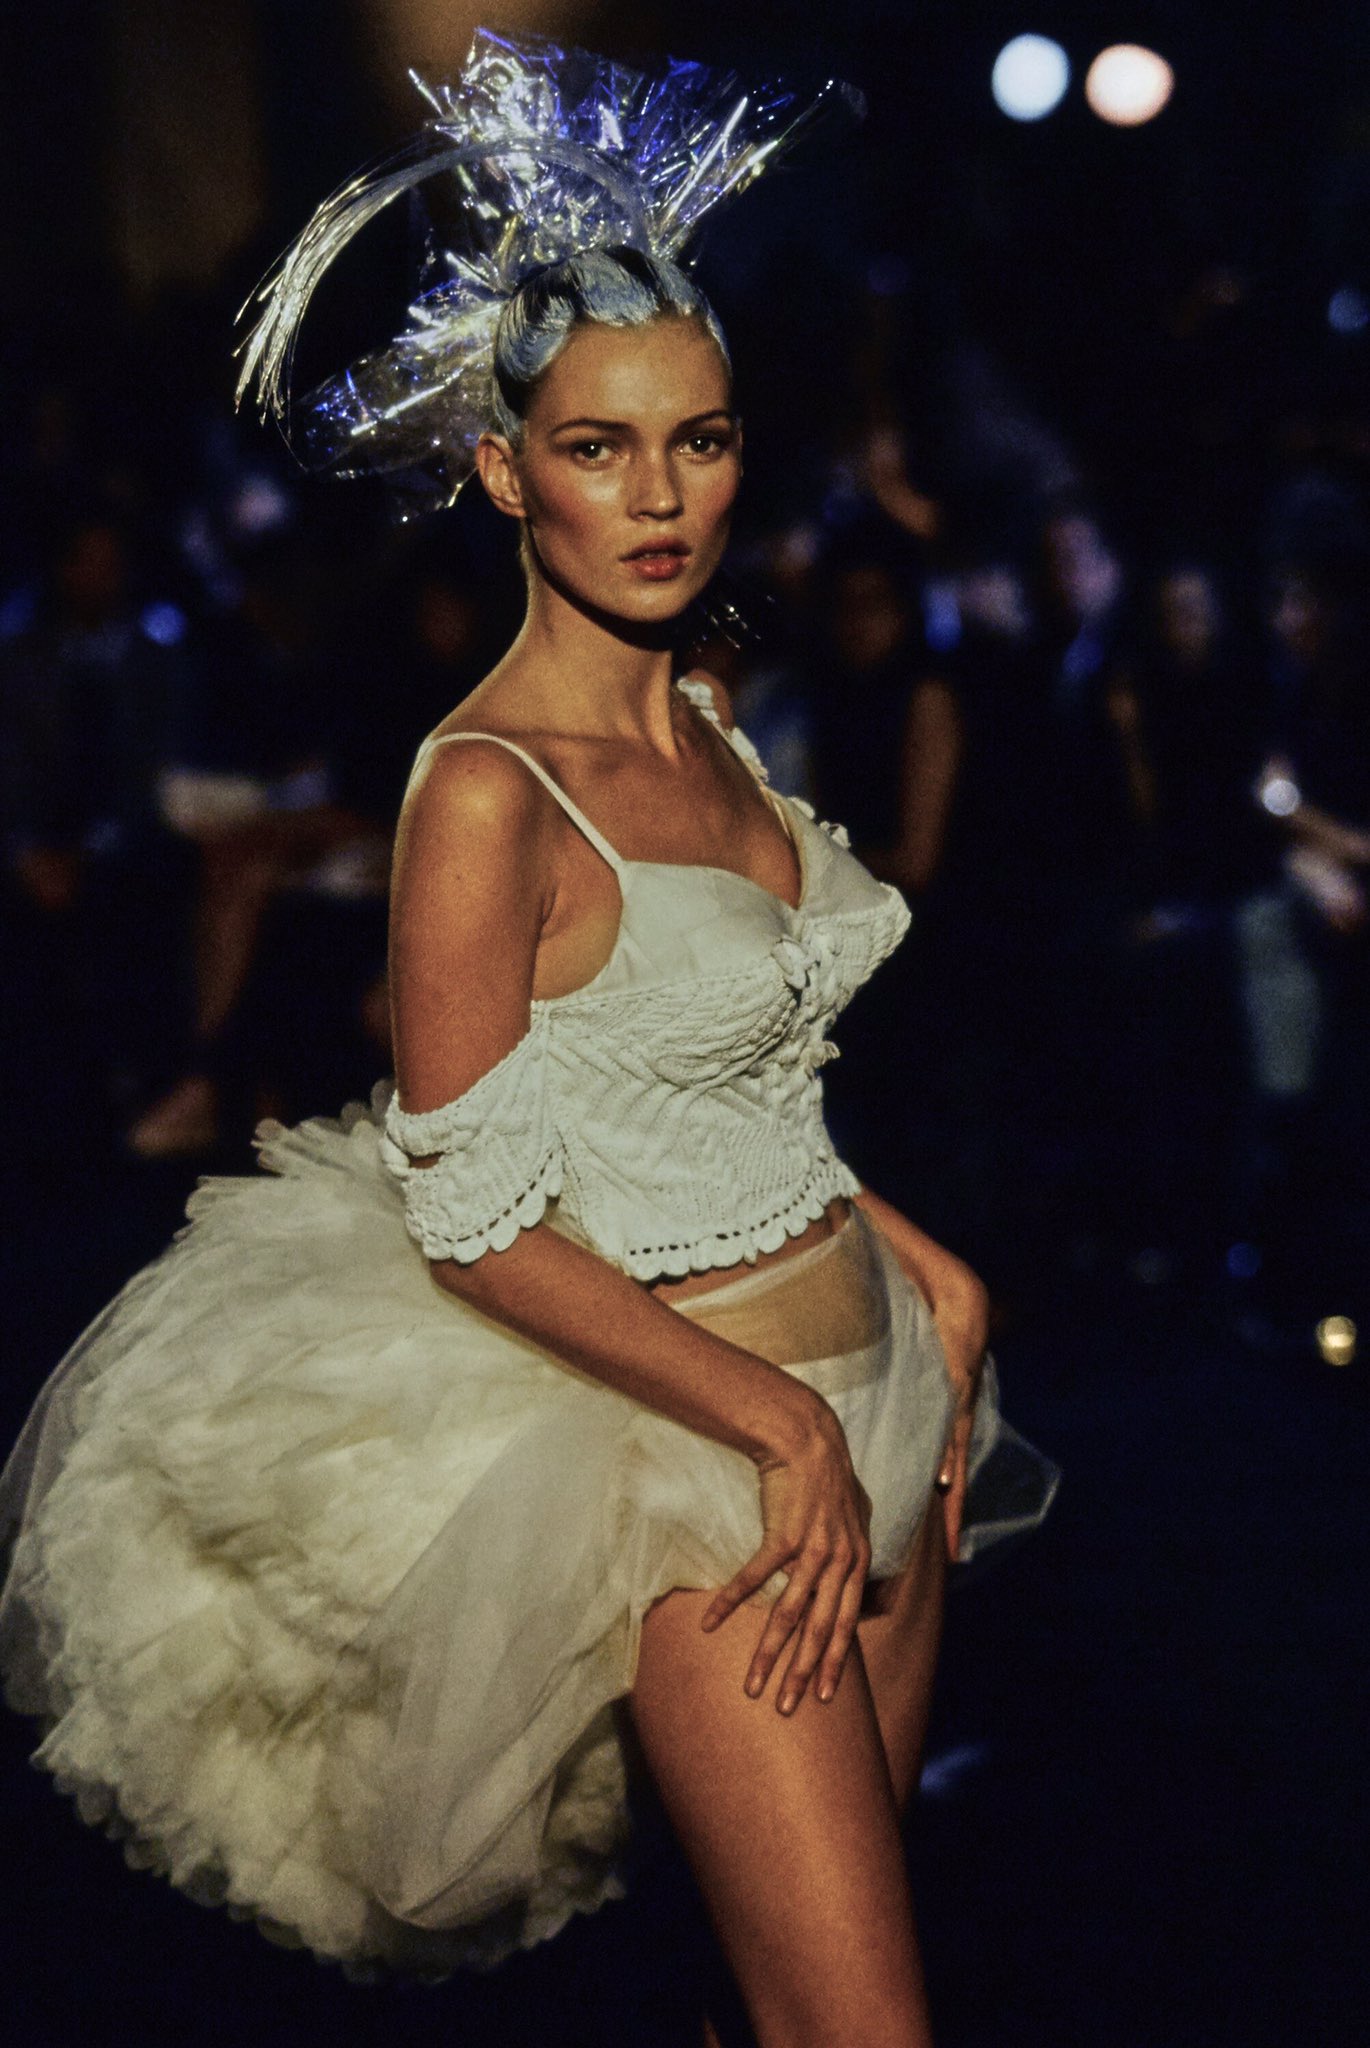 Watch John Galliano prep Kate Moss in this 90s clip